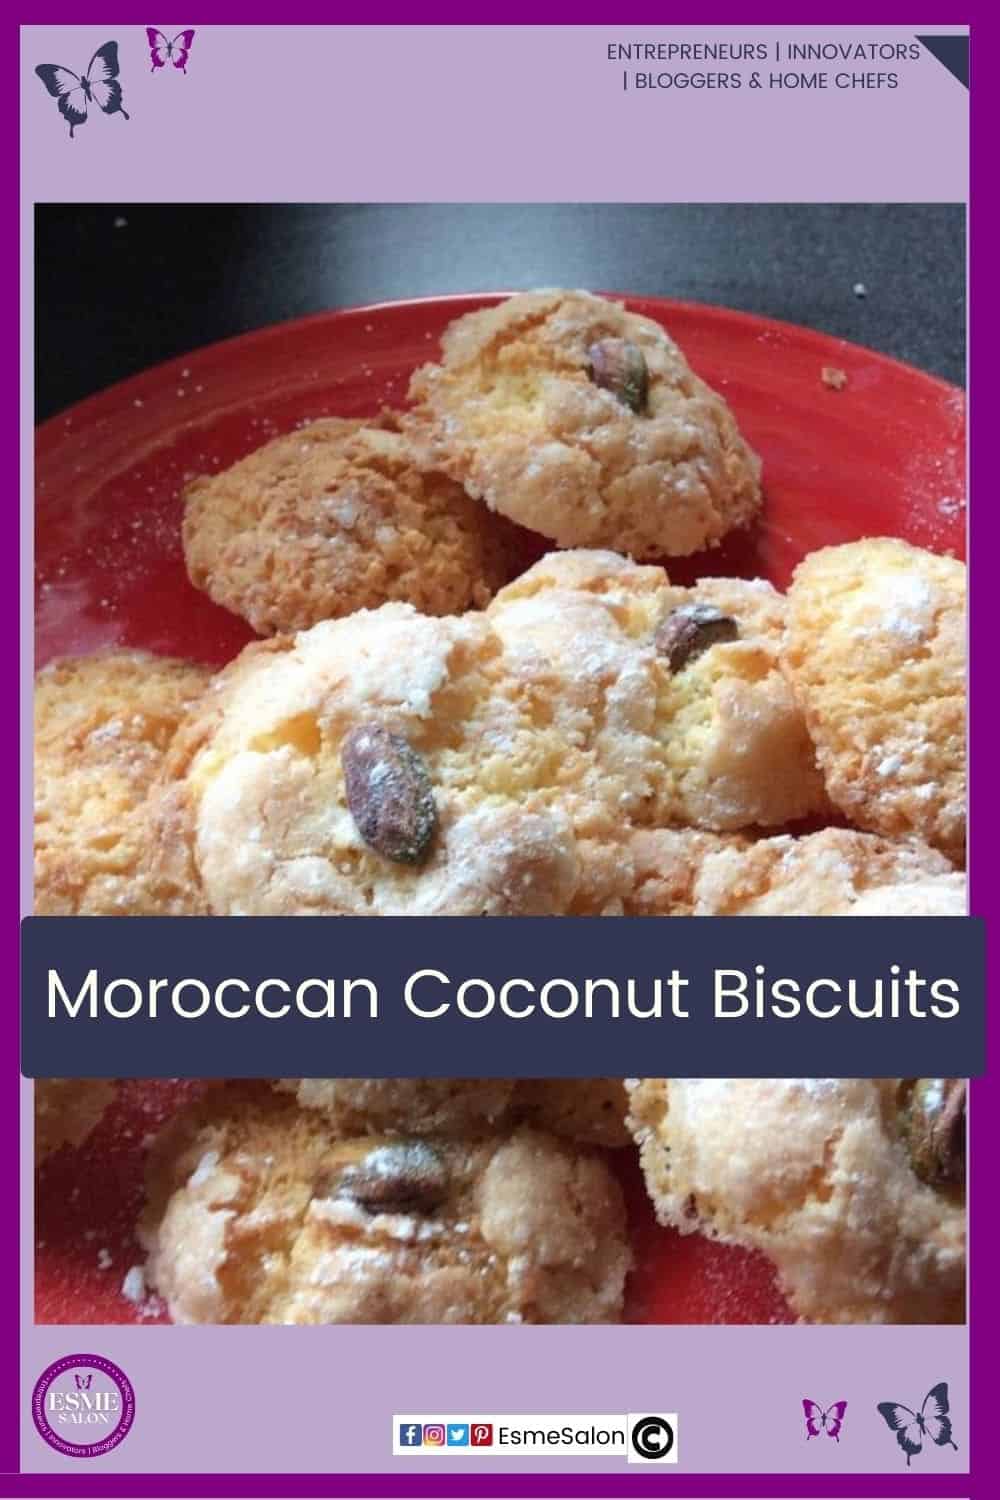 an image of a red plate filled with Moroccan Coconut Biscuits and dusted with icing sugar